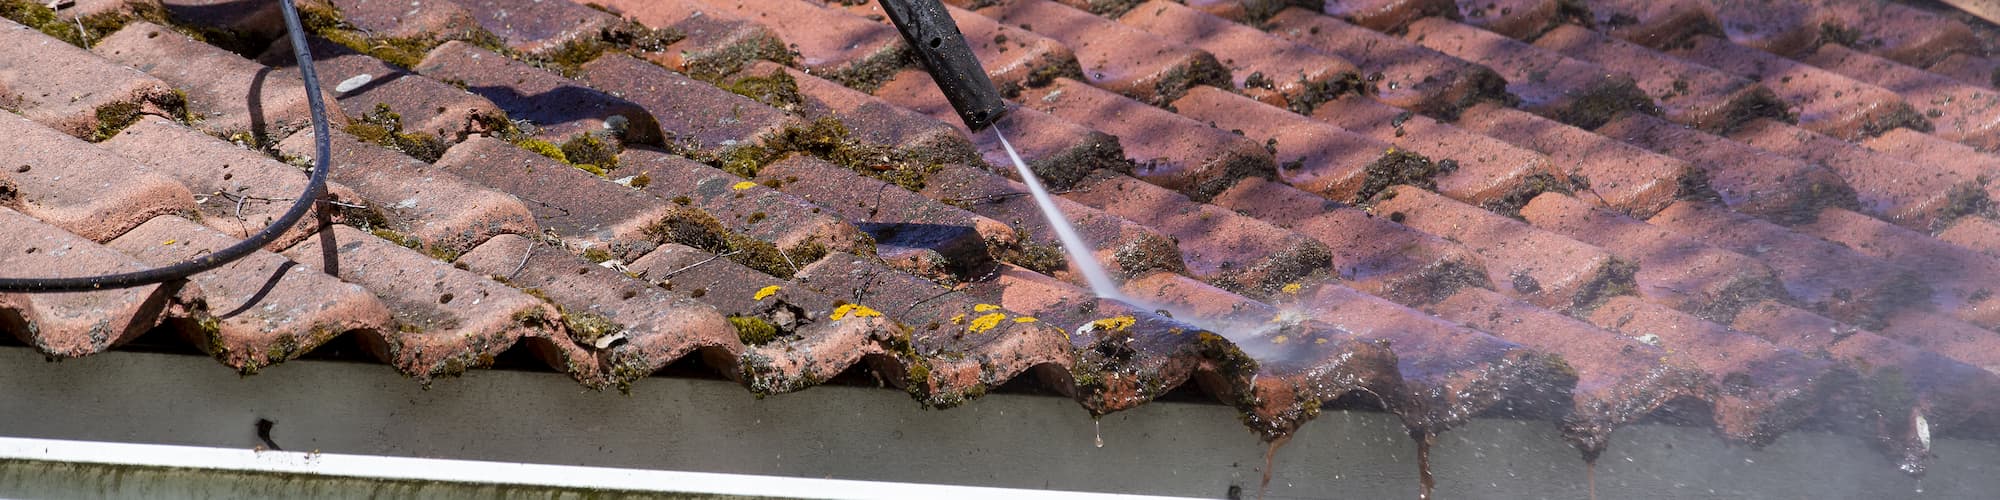 Pressure washing roof tiles and guttering